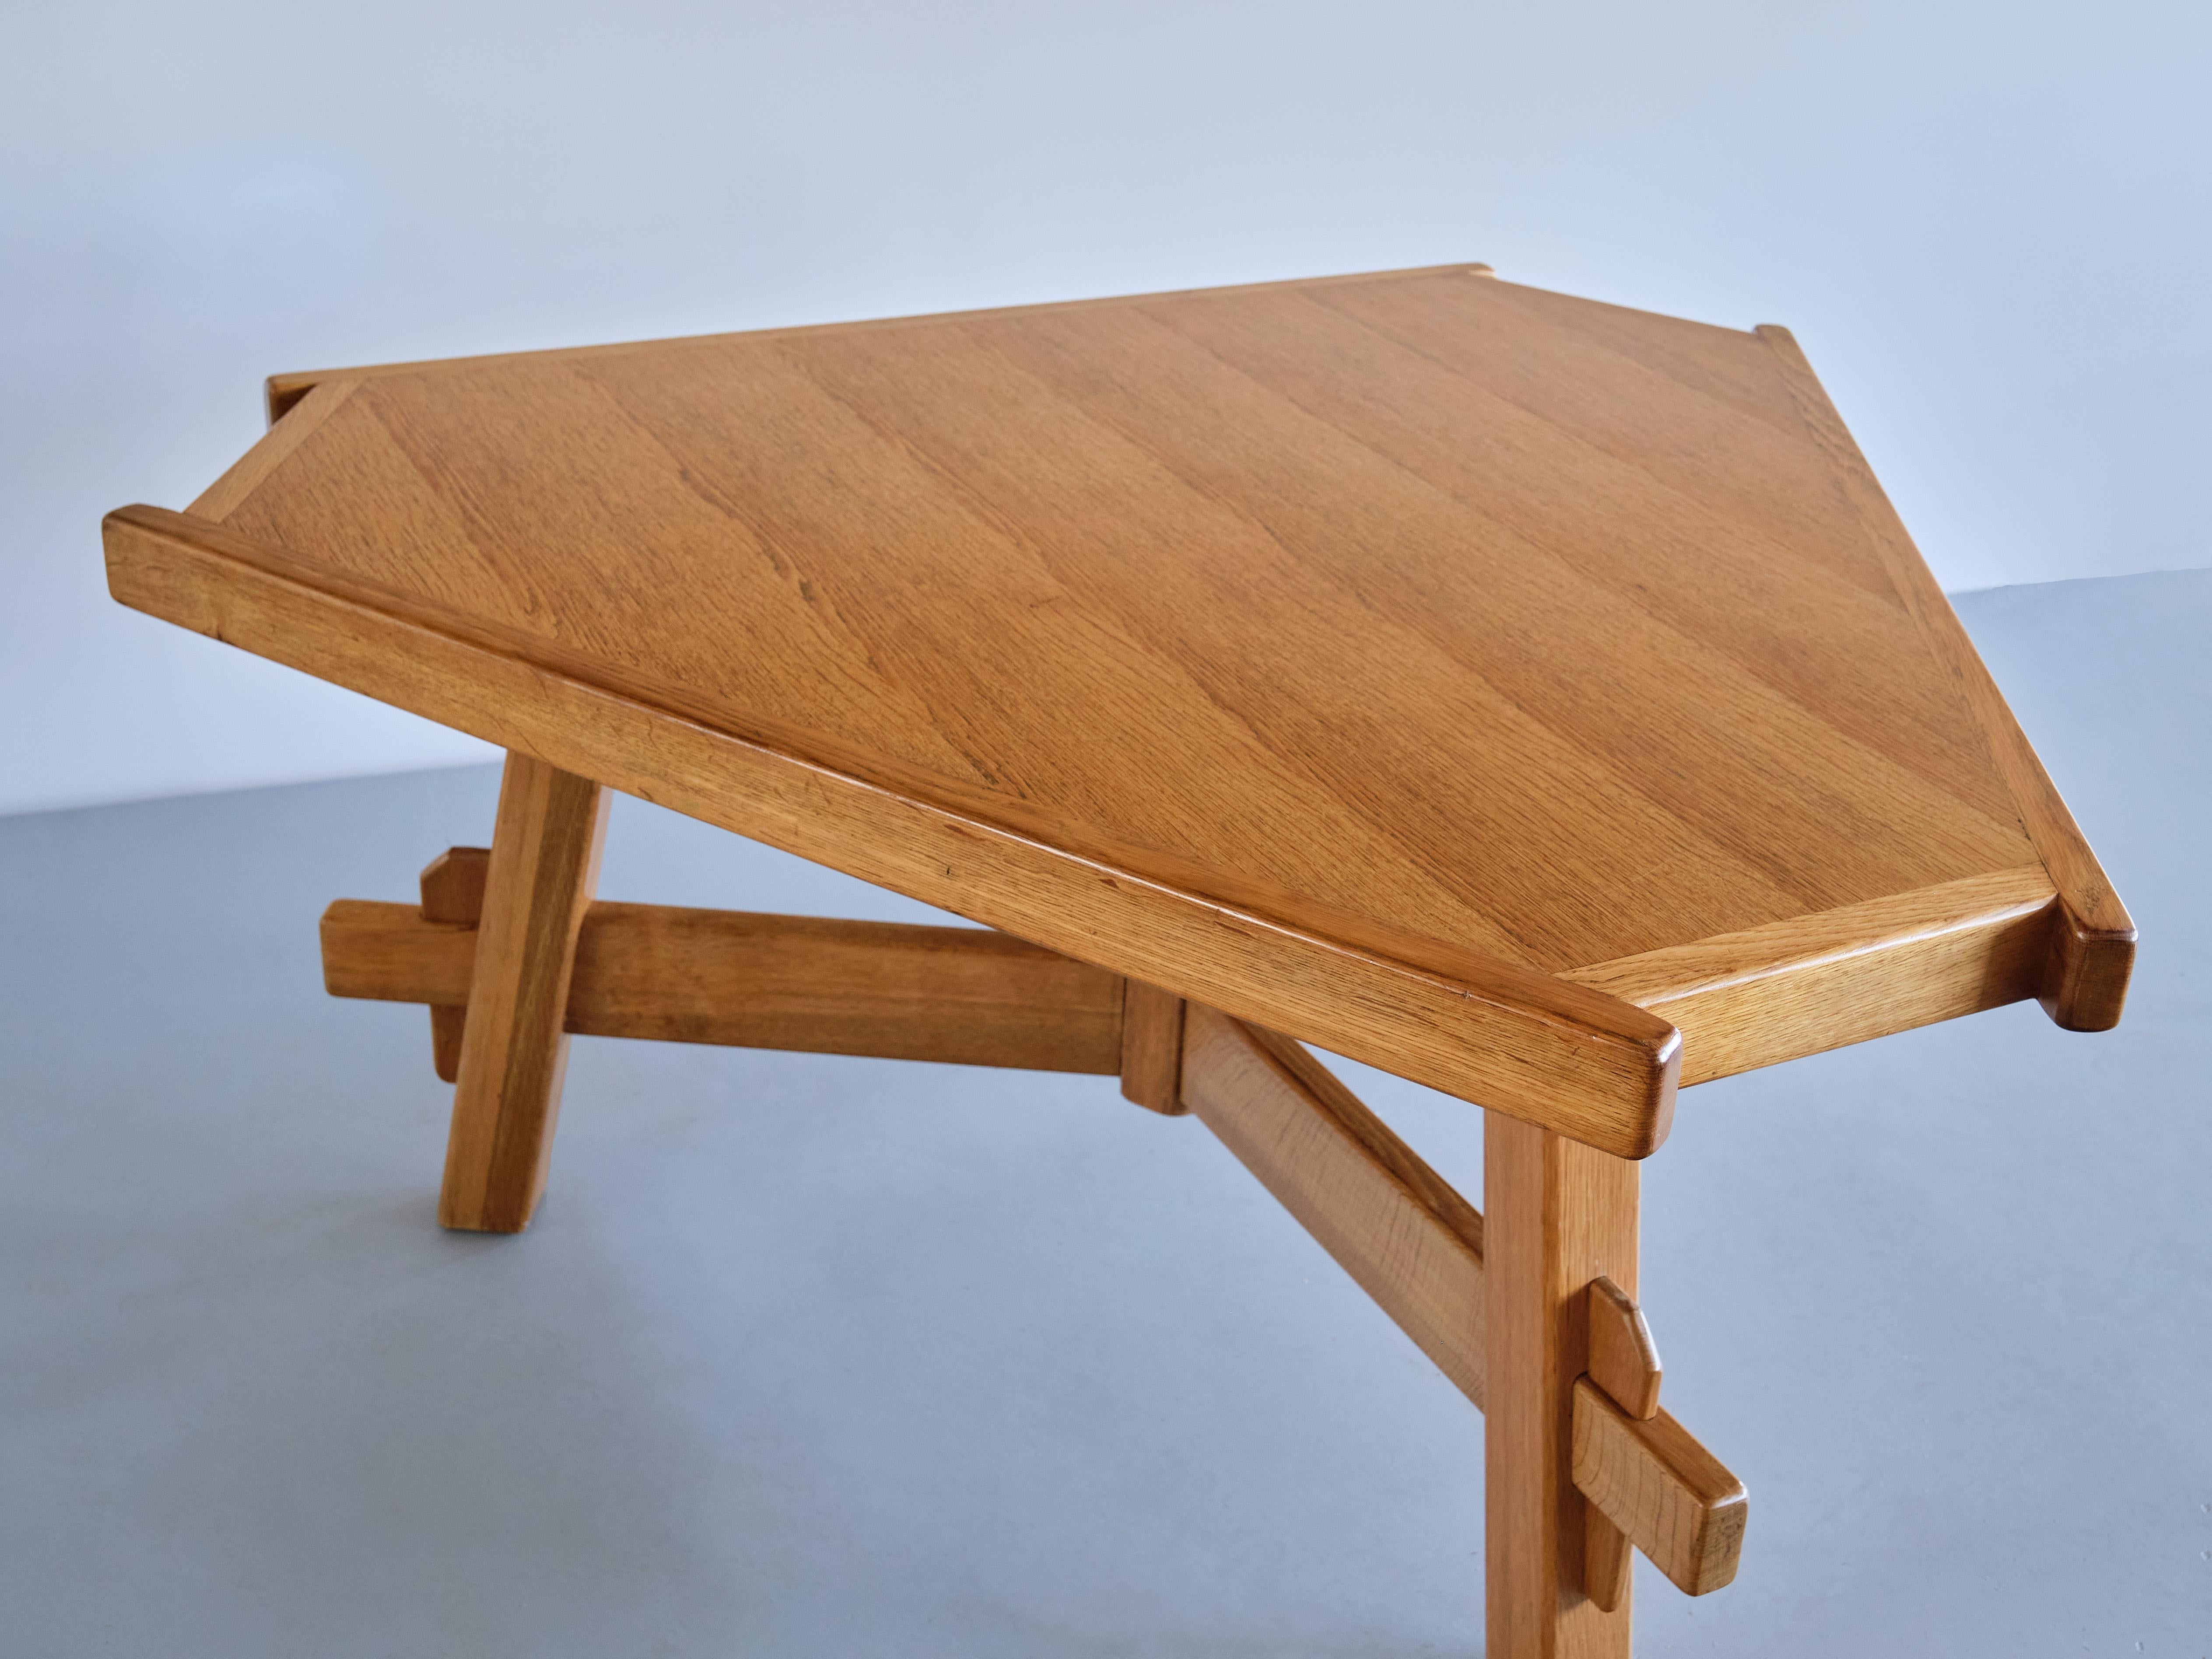 Triangular French Modern Dining Table in Solid Oak Wood, France, 1960s For Sale 7